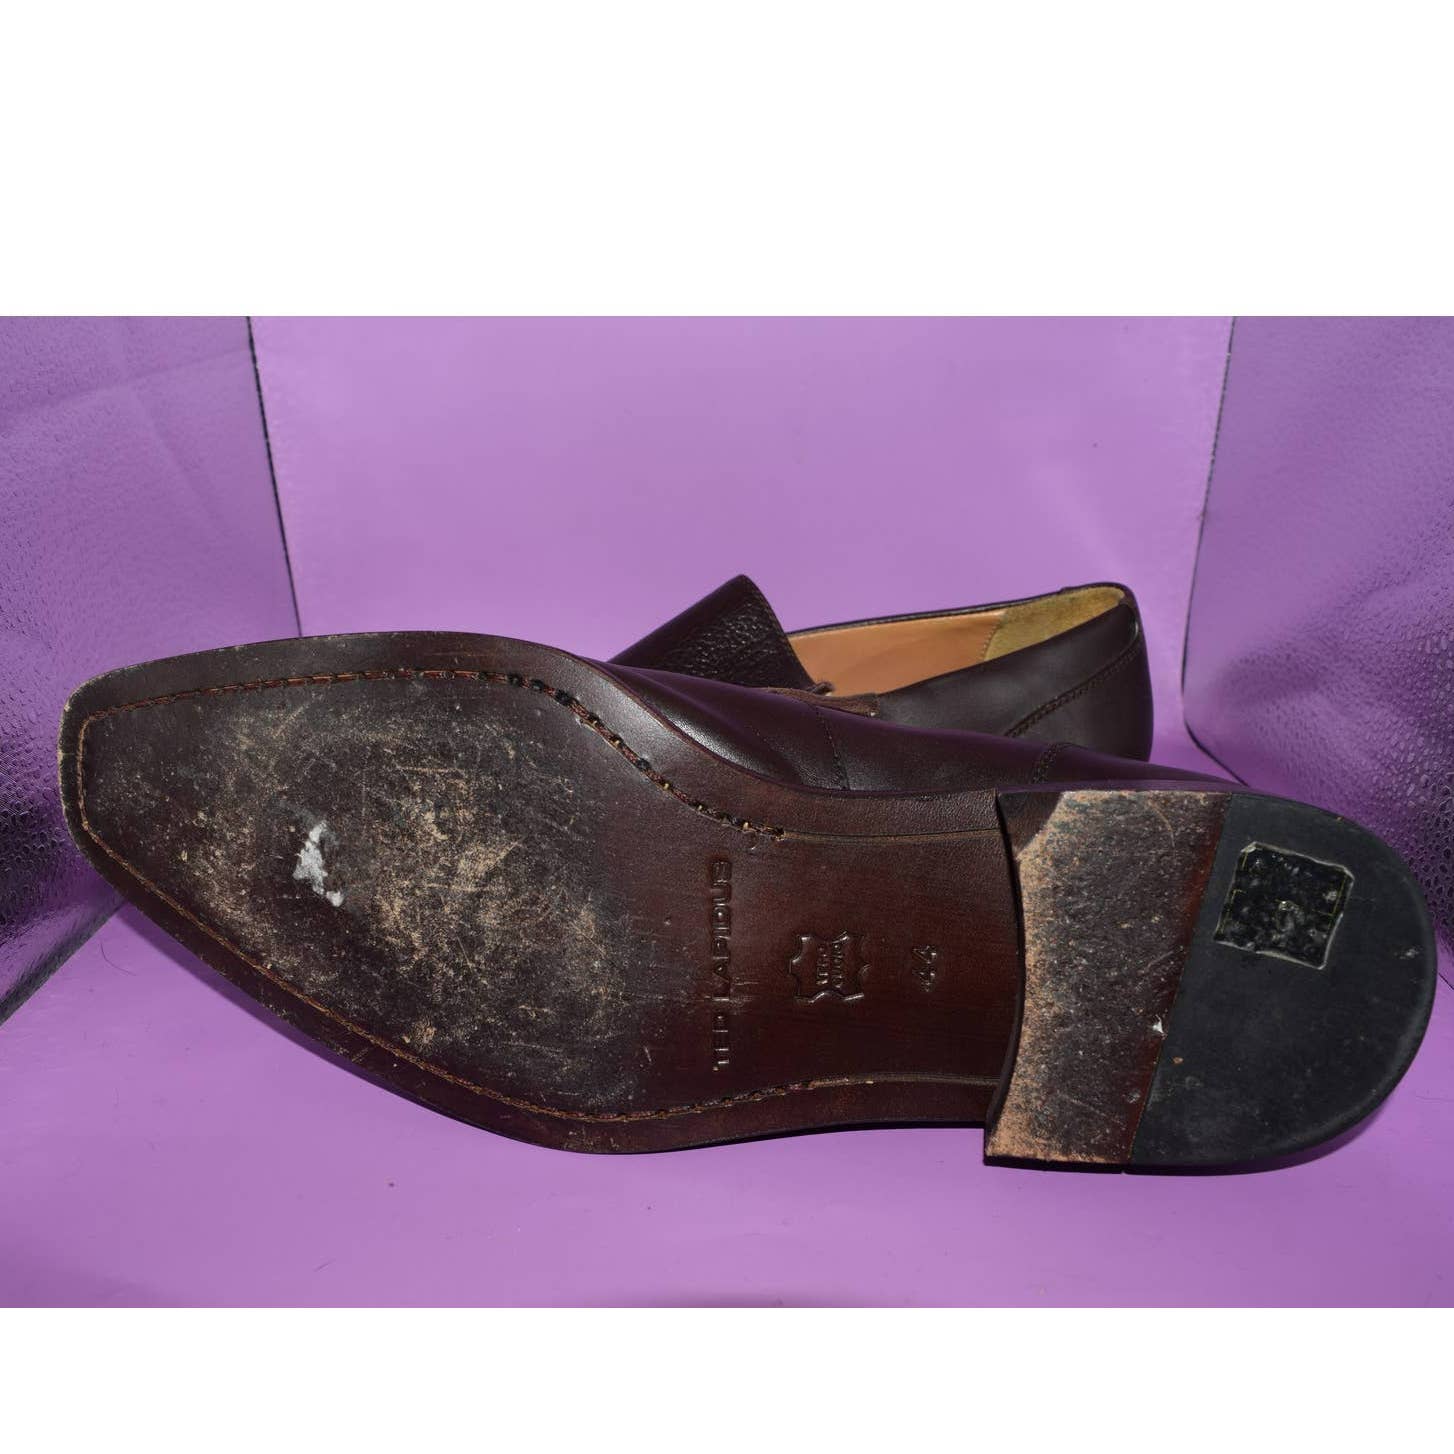 Ted Lapidus Brown Square Toe Loafer Shoes - 44 / 10.5